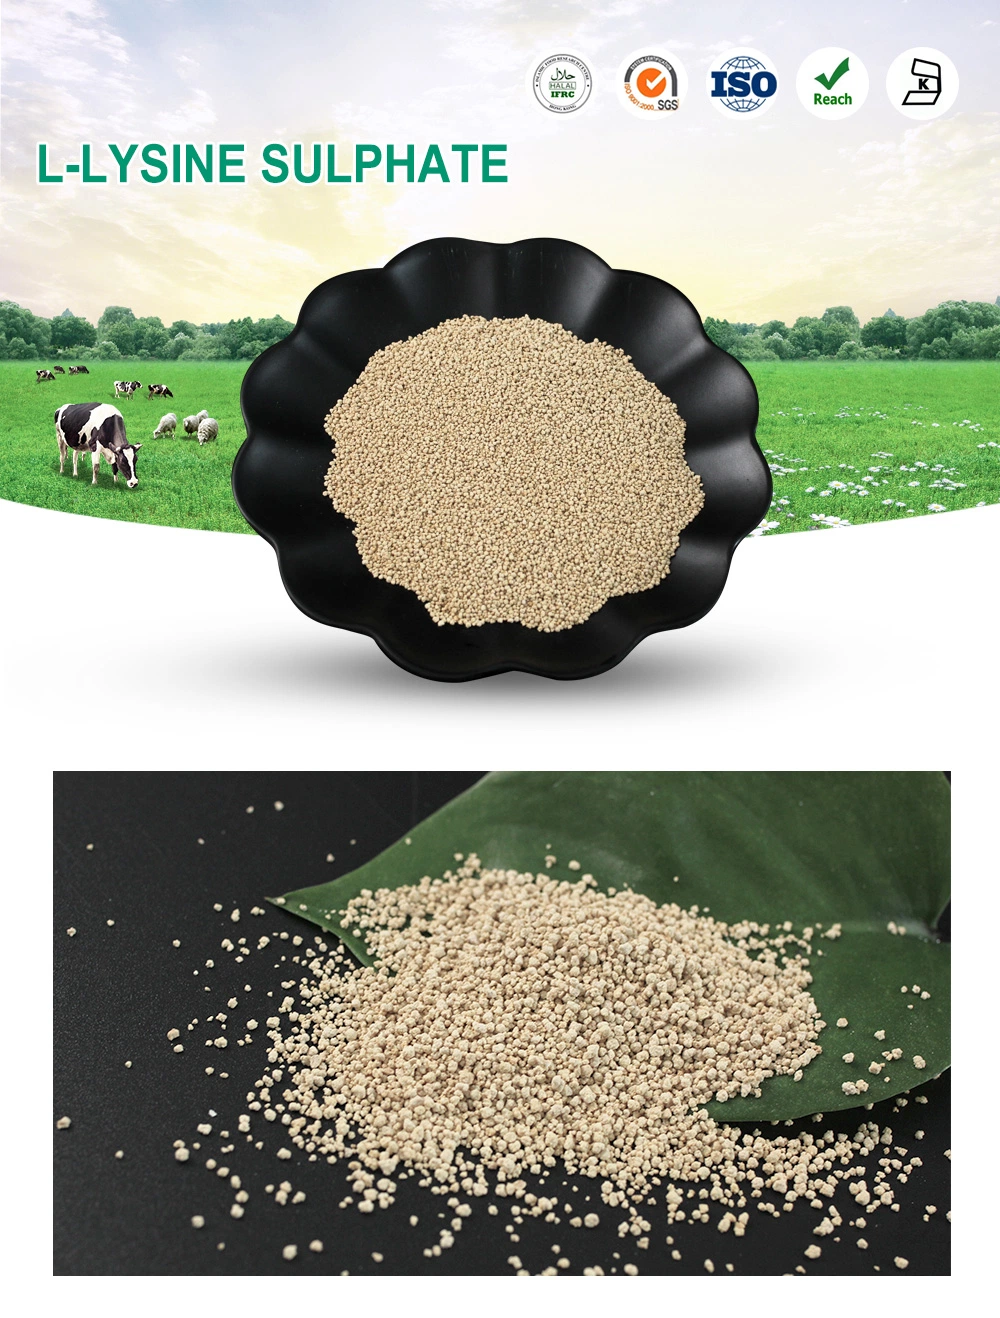 L-Lysine Sulphate Feed Grade Meihua Brand Fufeng Brand